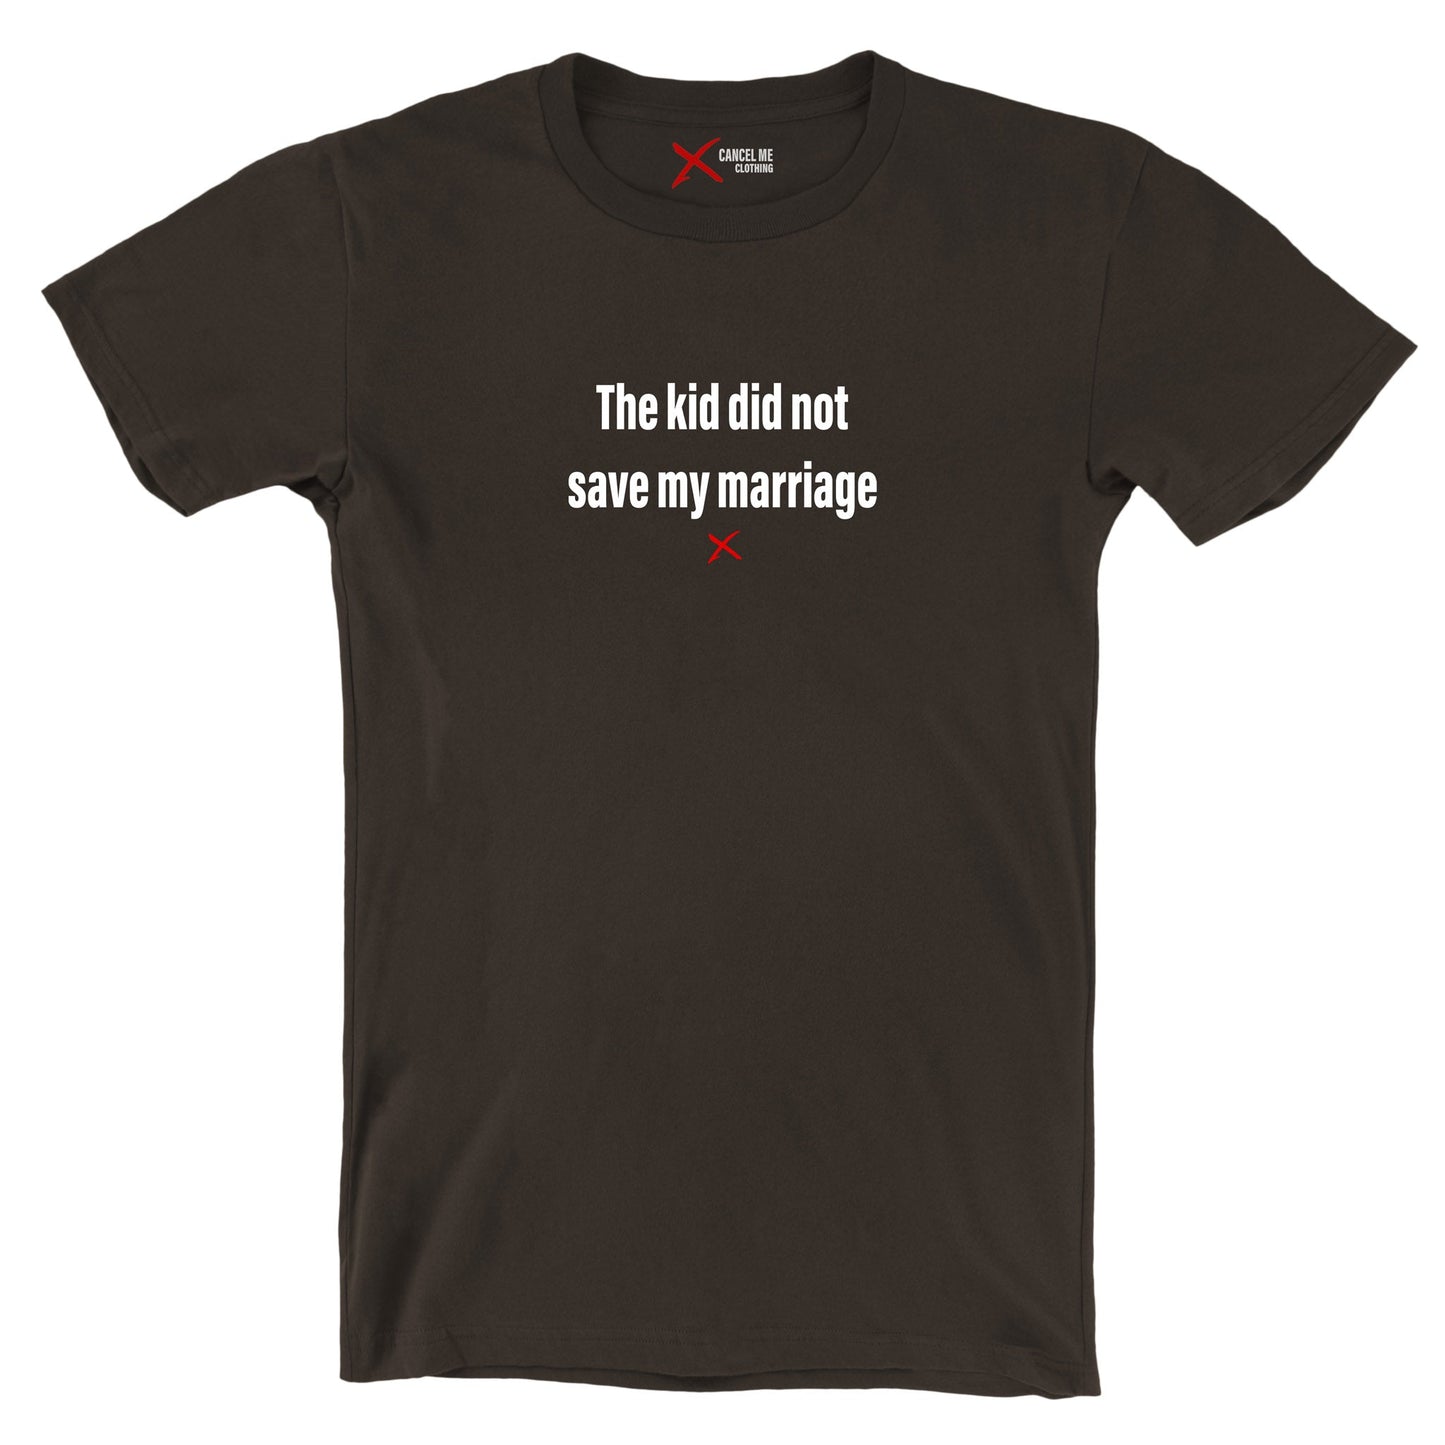 The kid did not save my marriage - Shirt